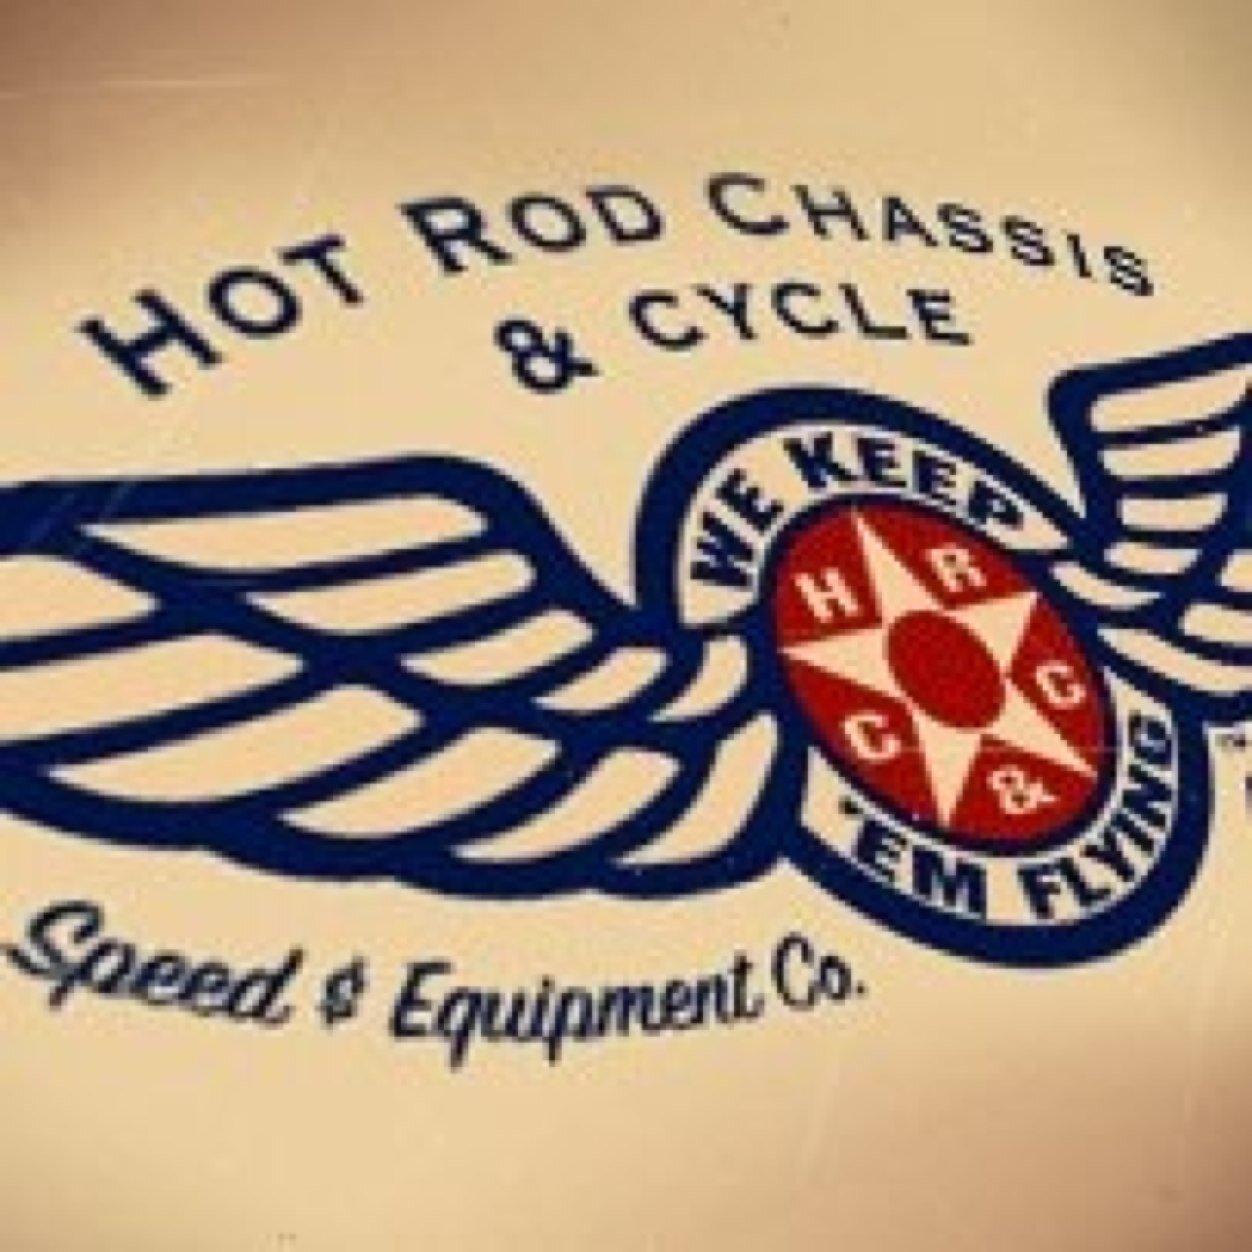 Builders of traditional Hot Rod, Custom, Road and Drag race automobiles...